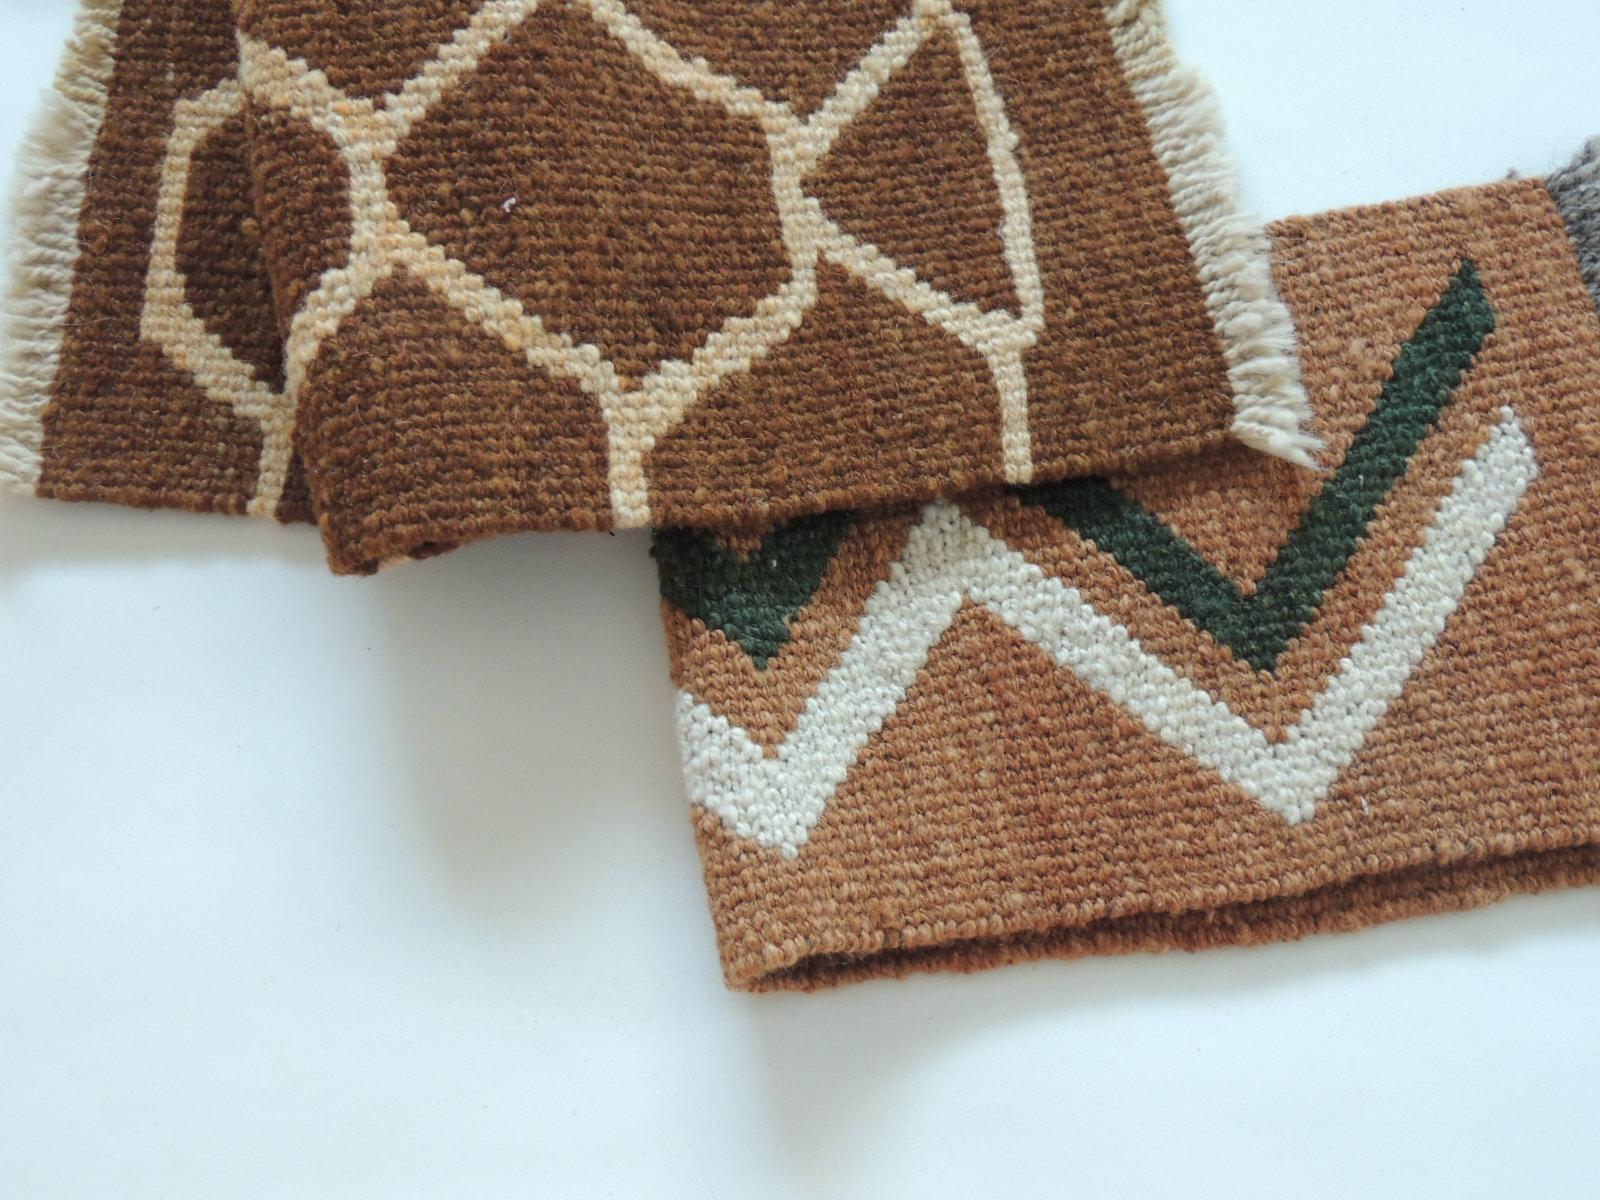 Spanish Pair of Vintage Camel and Brown Woven Rug Samples